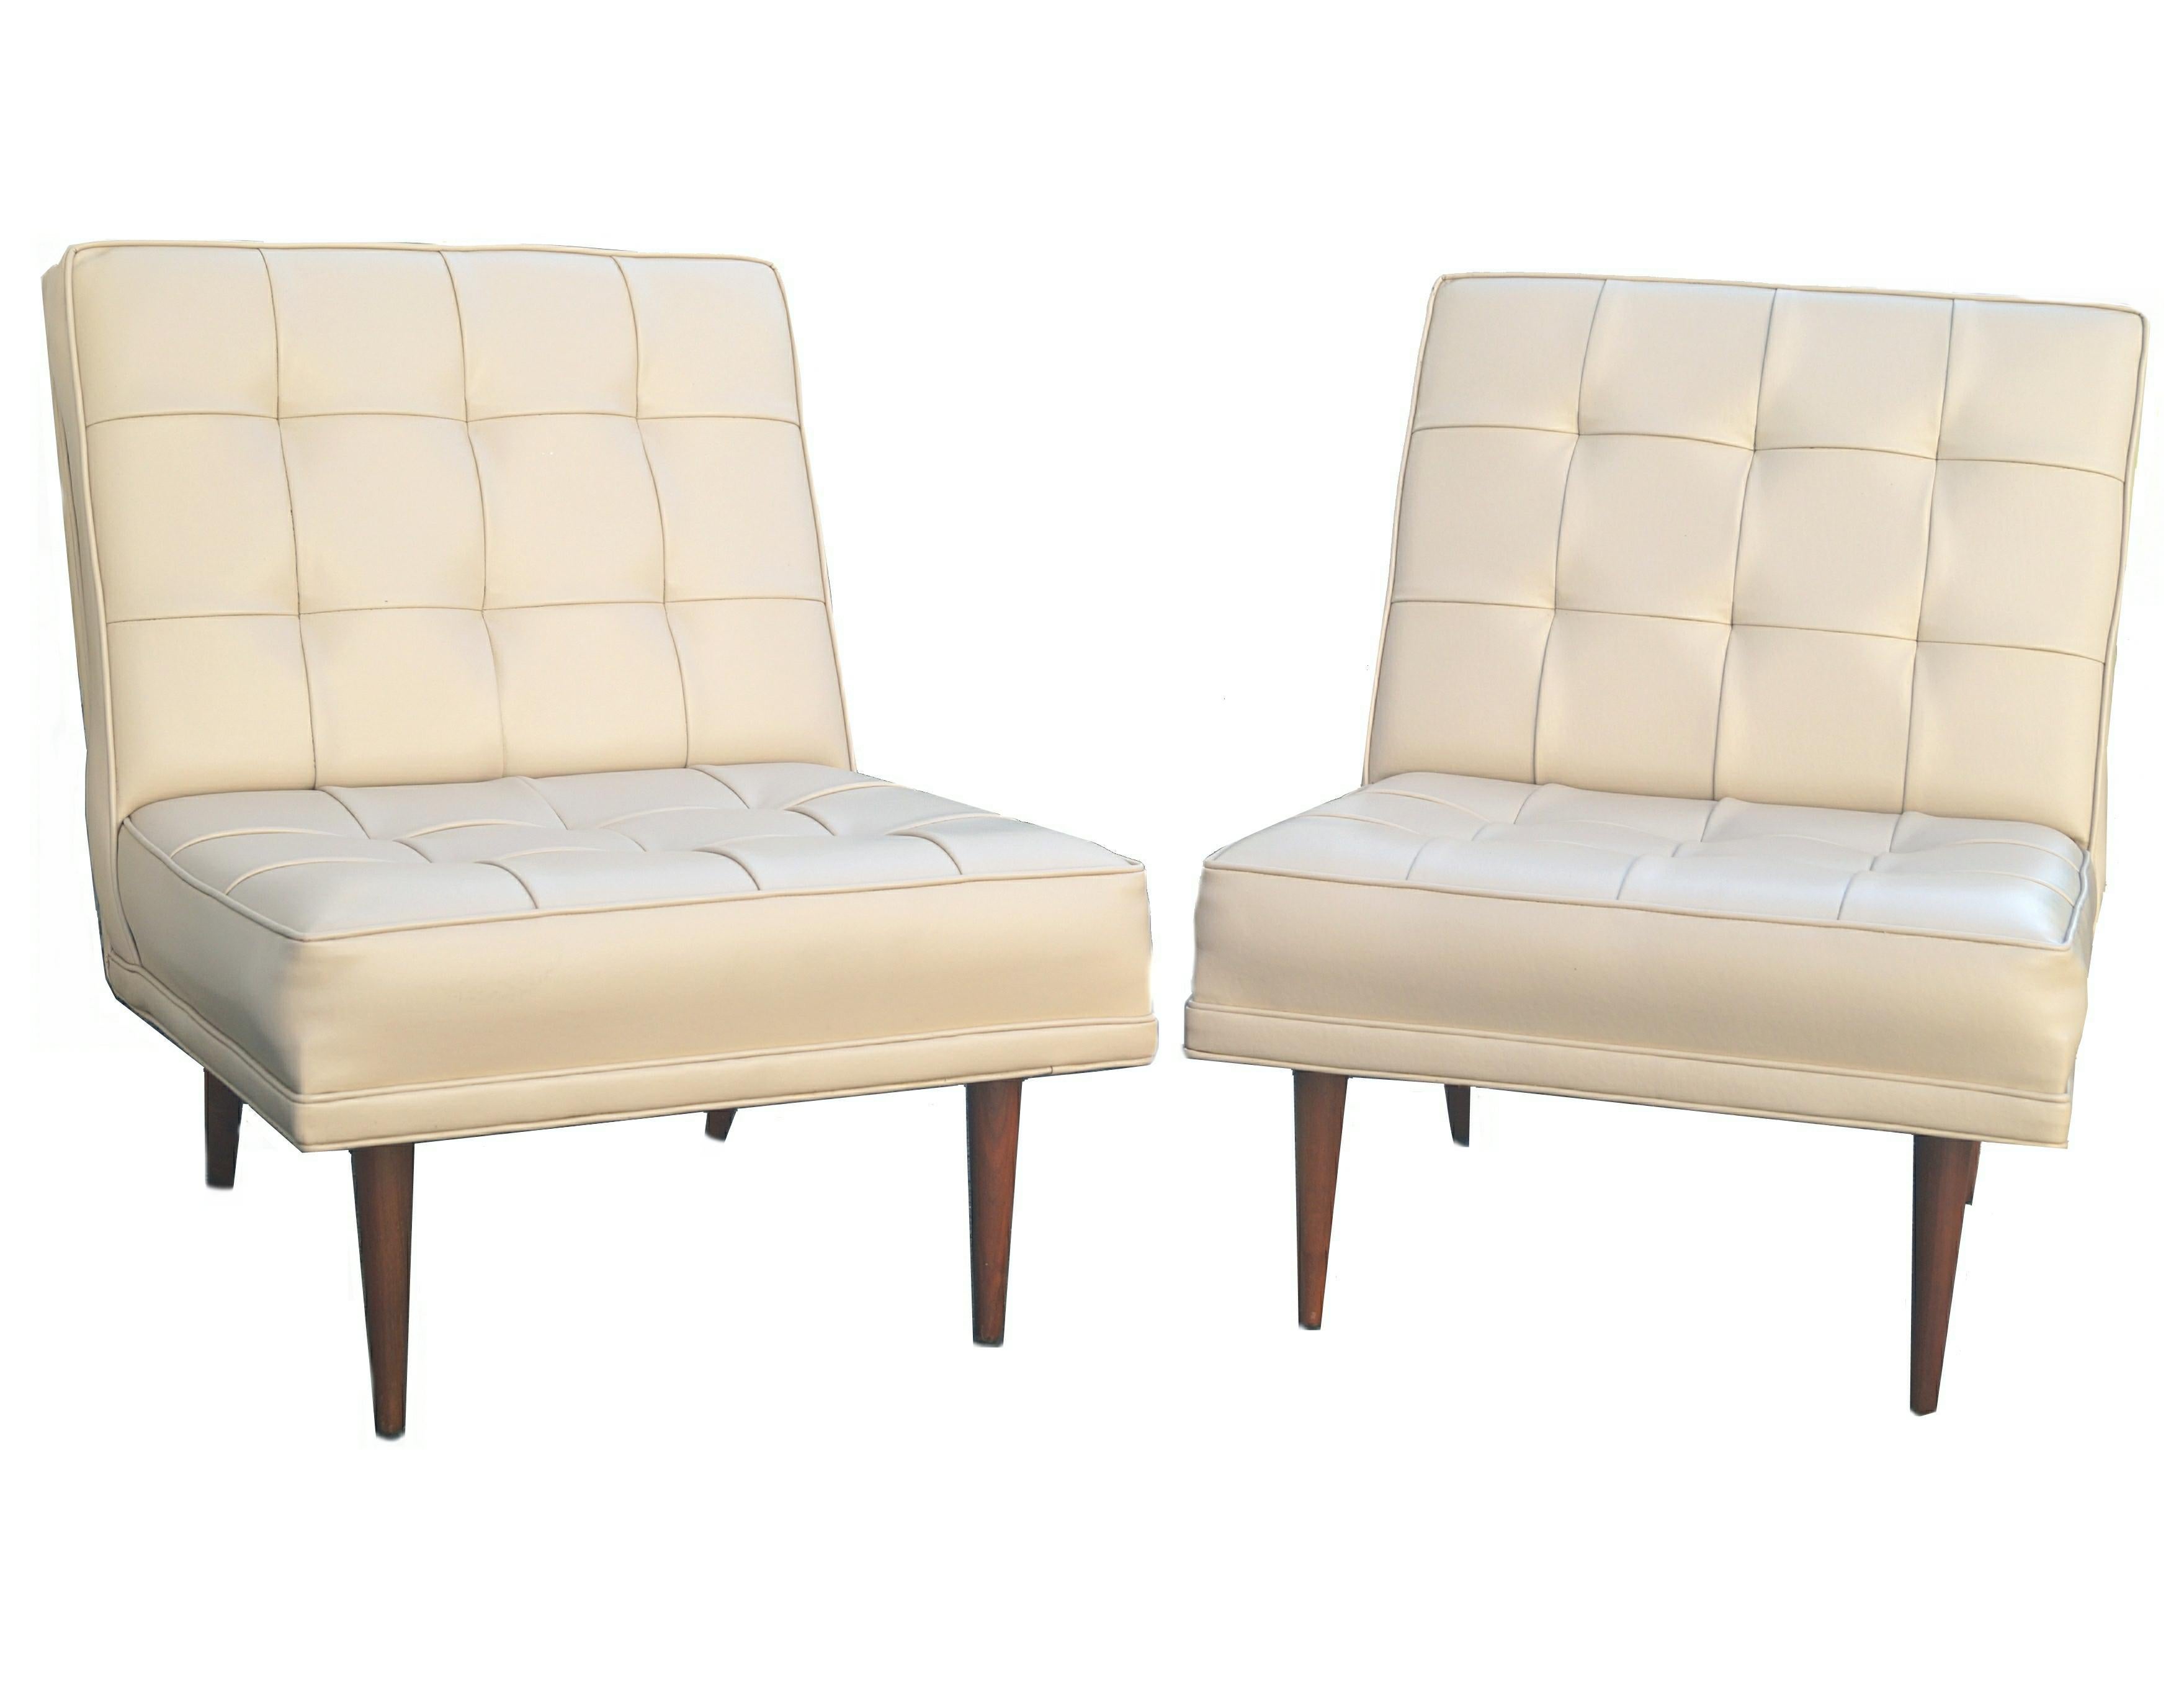 Pair of Mid-Century Modern lounge slipper chairs. If you are in the New Jersey , New York City Metro Area , please contact us with your delivery zip code, as we may be able to deliver curbside for less than the calculated White Glove rates shown.